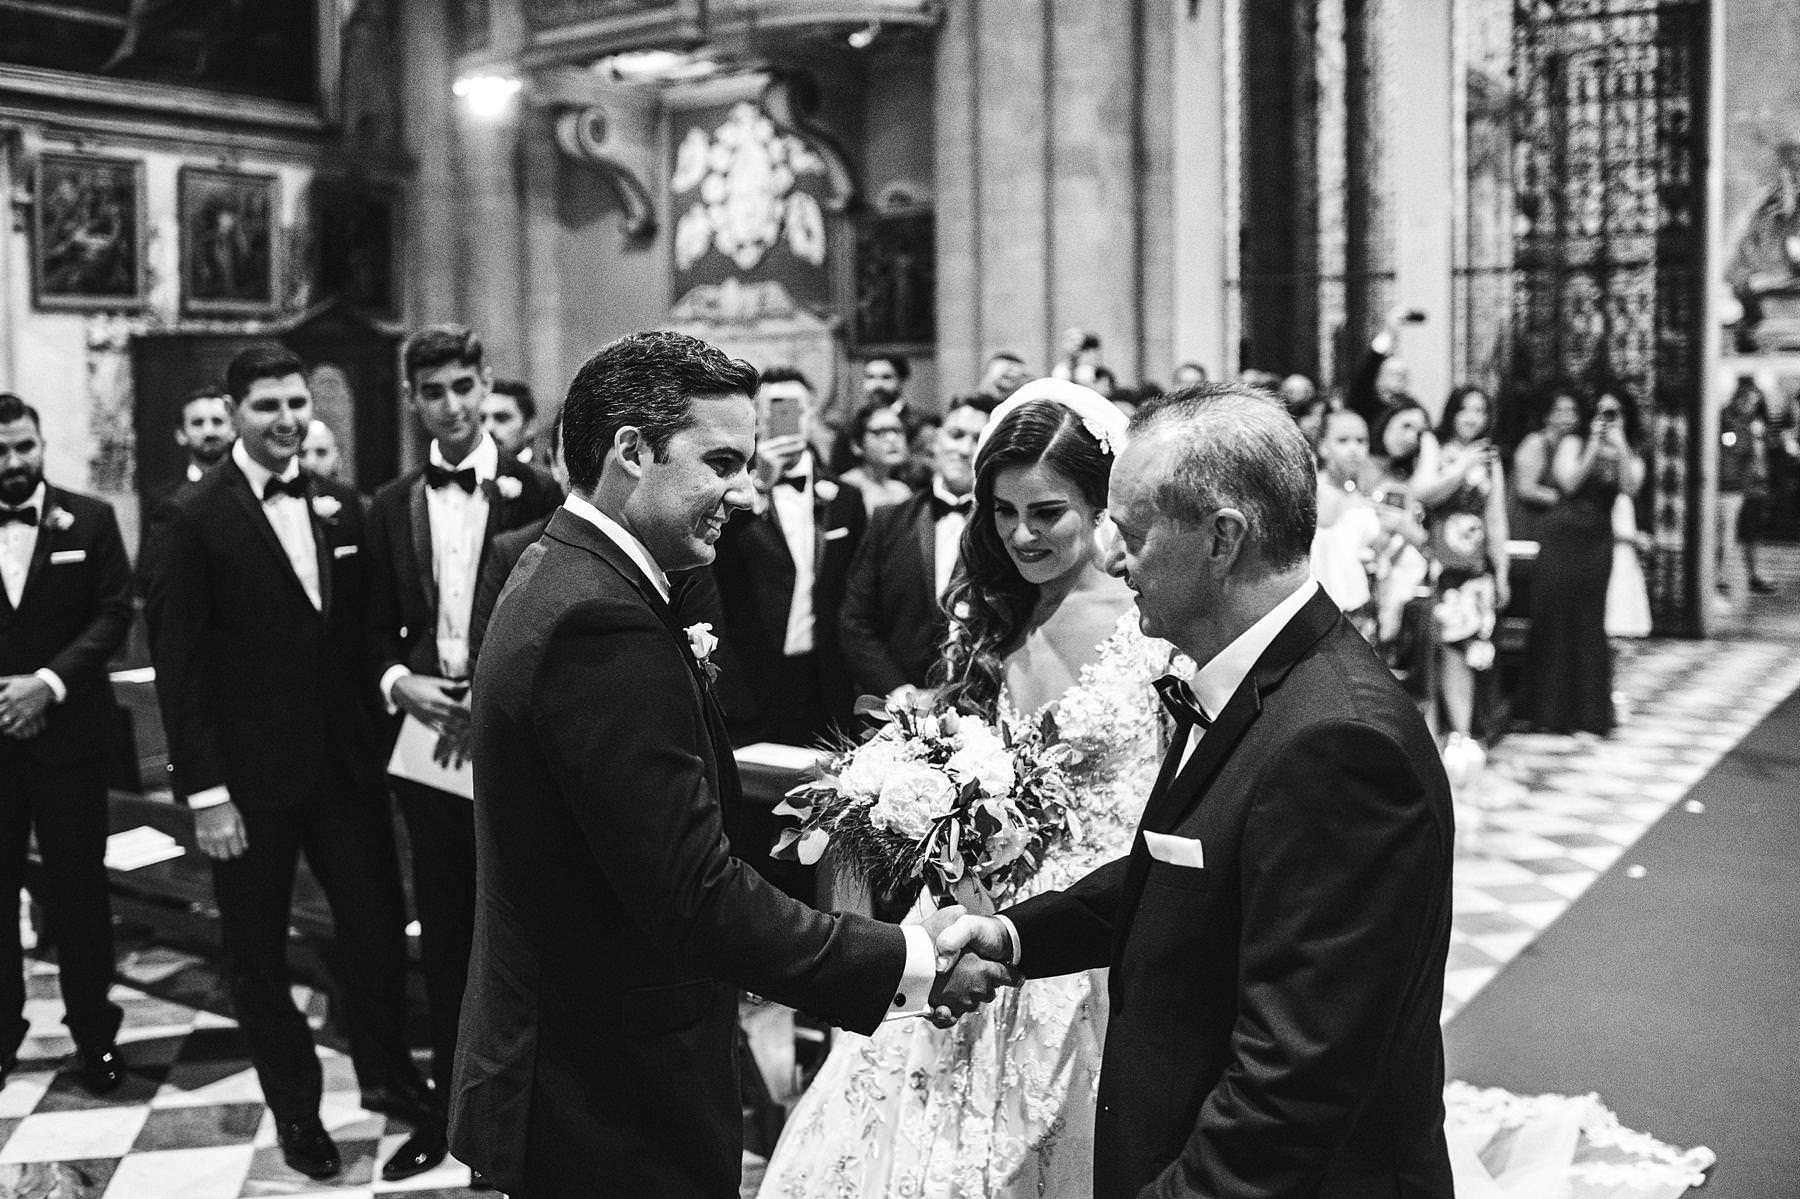 Emotional moment during wedding ceremony in the Arezzo Cathedral